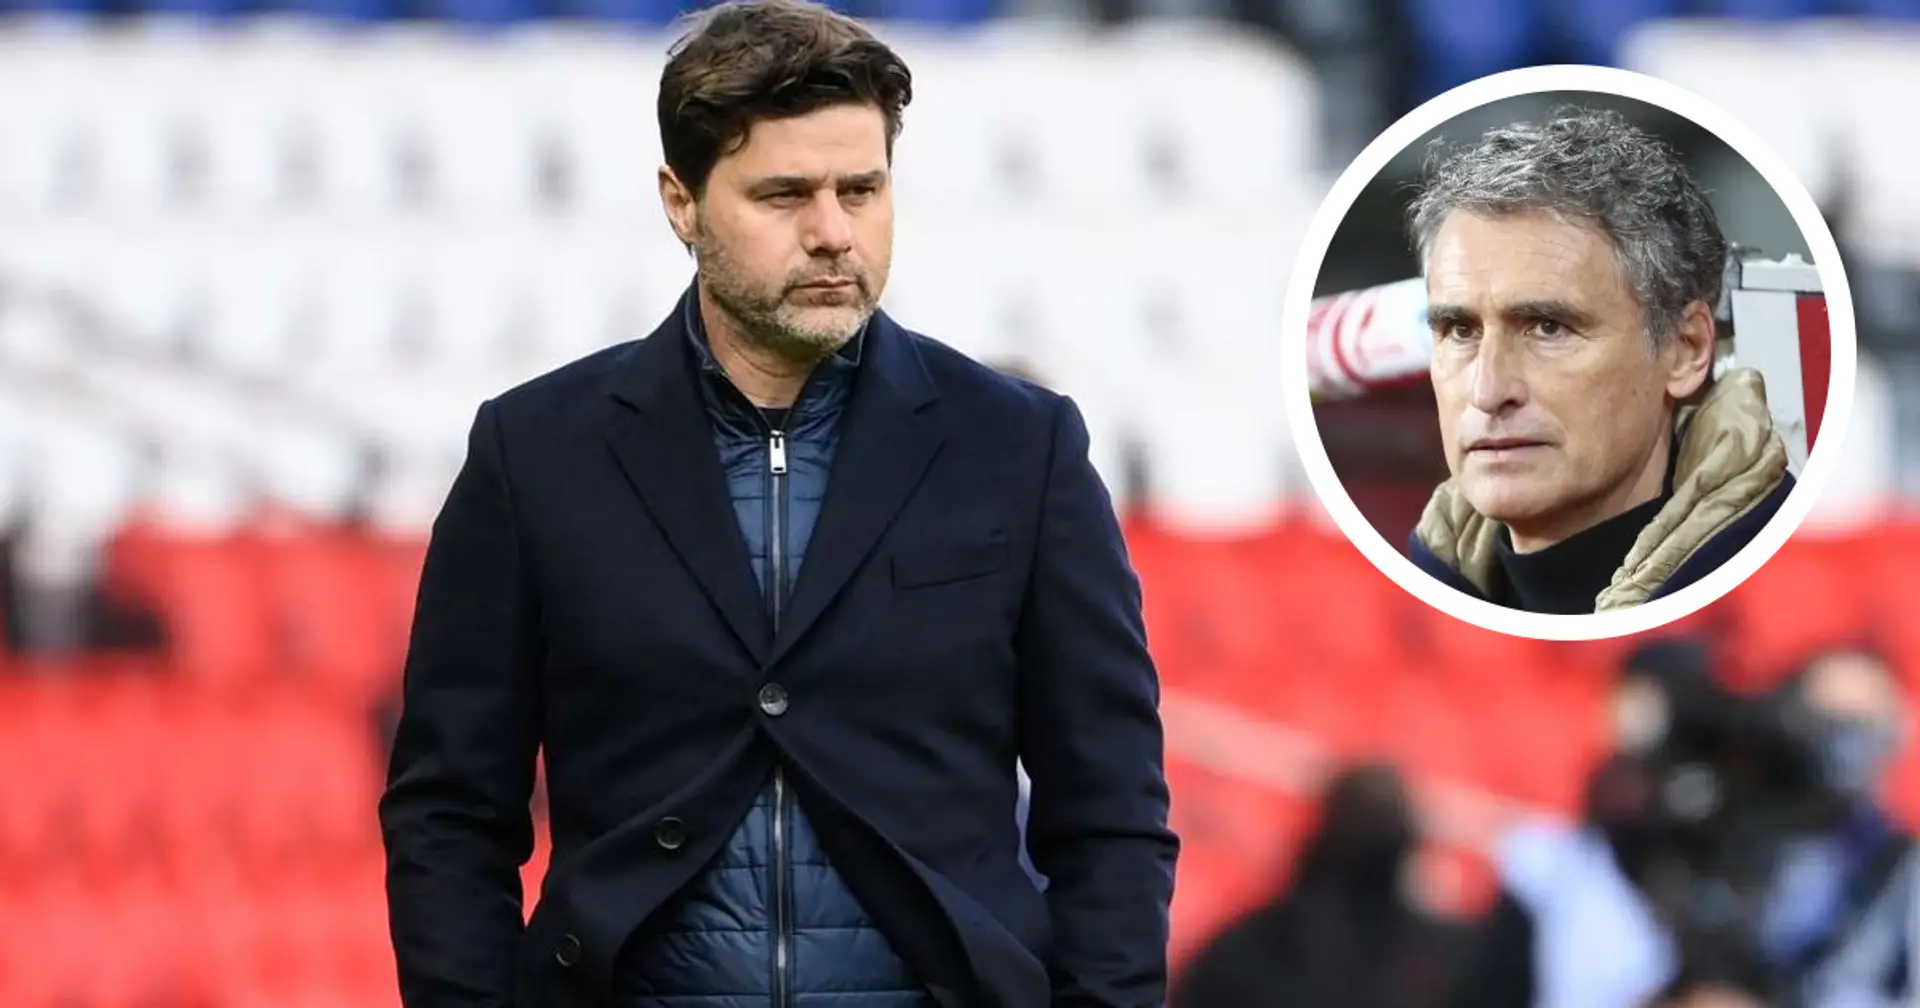 Montpellier boss on Pochettino: 'Choices he makes at PSG are not want he truly wants to do'